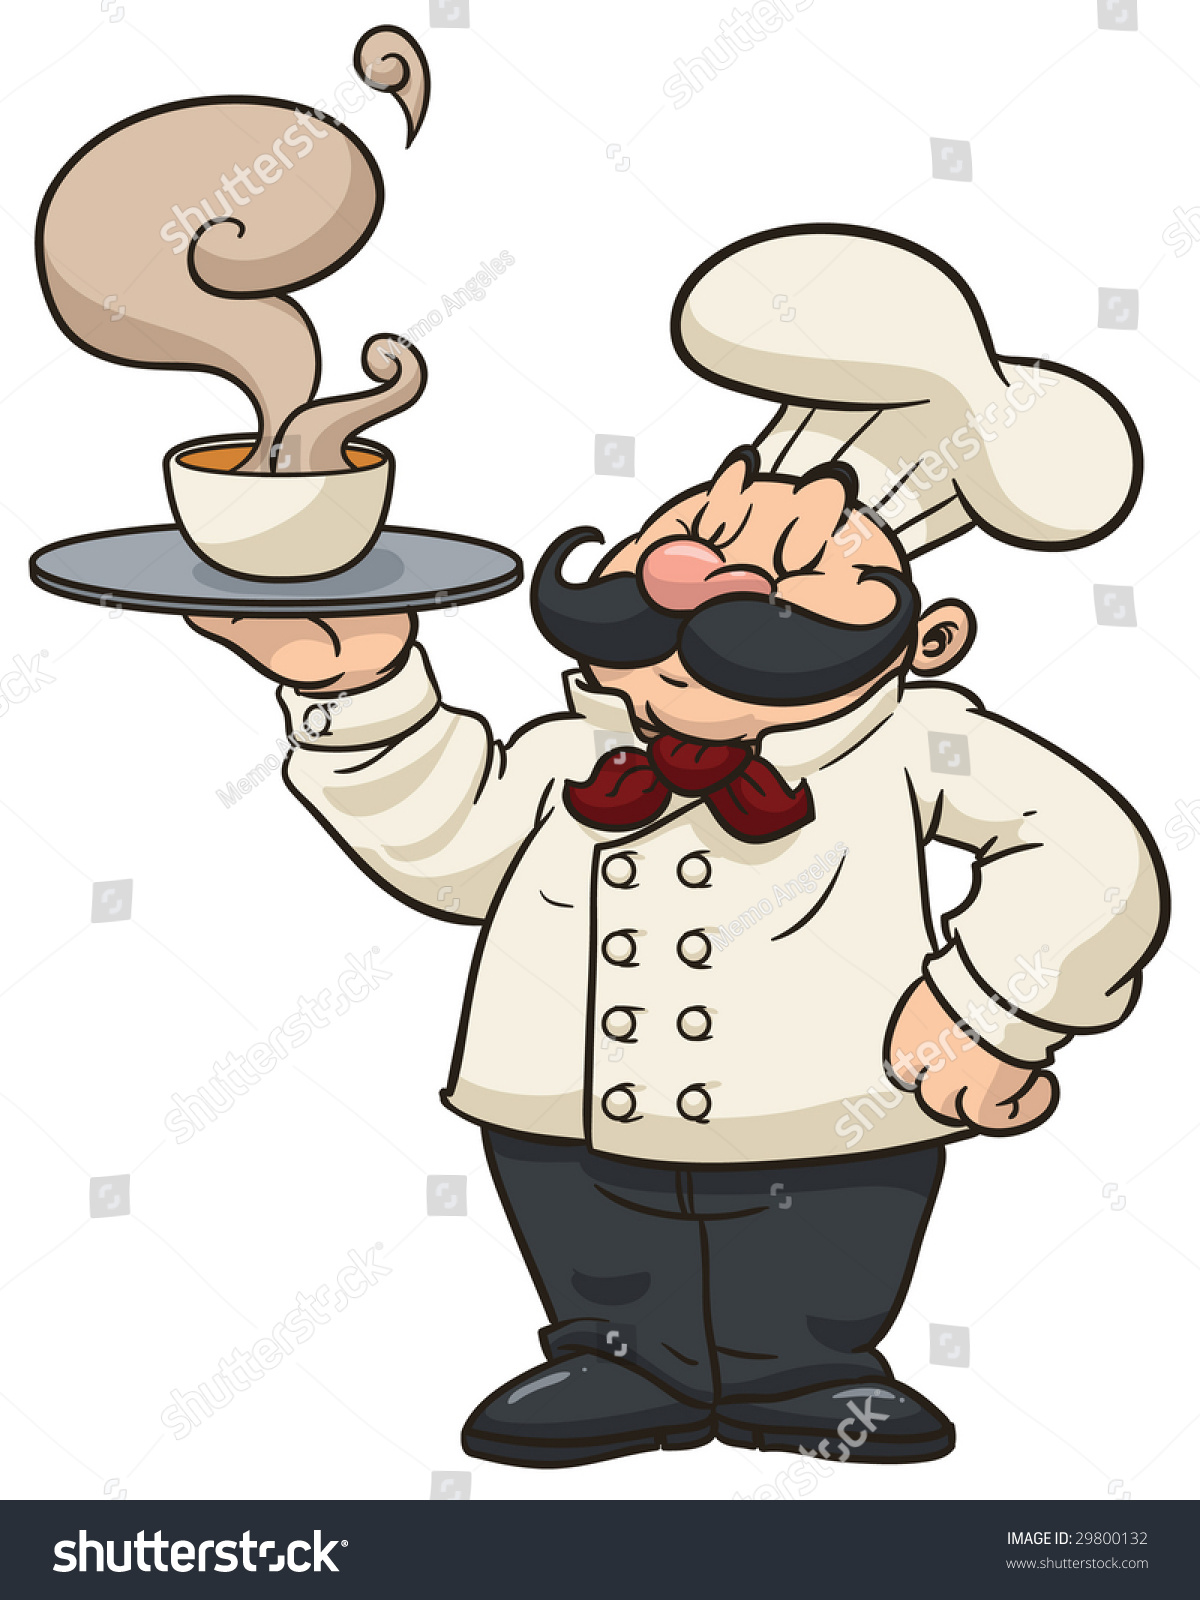 Cartoon Chef Holding Steamy Bowl Soup Stock Vector 29800132 - Shutterstock